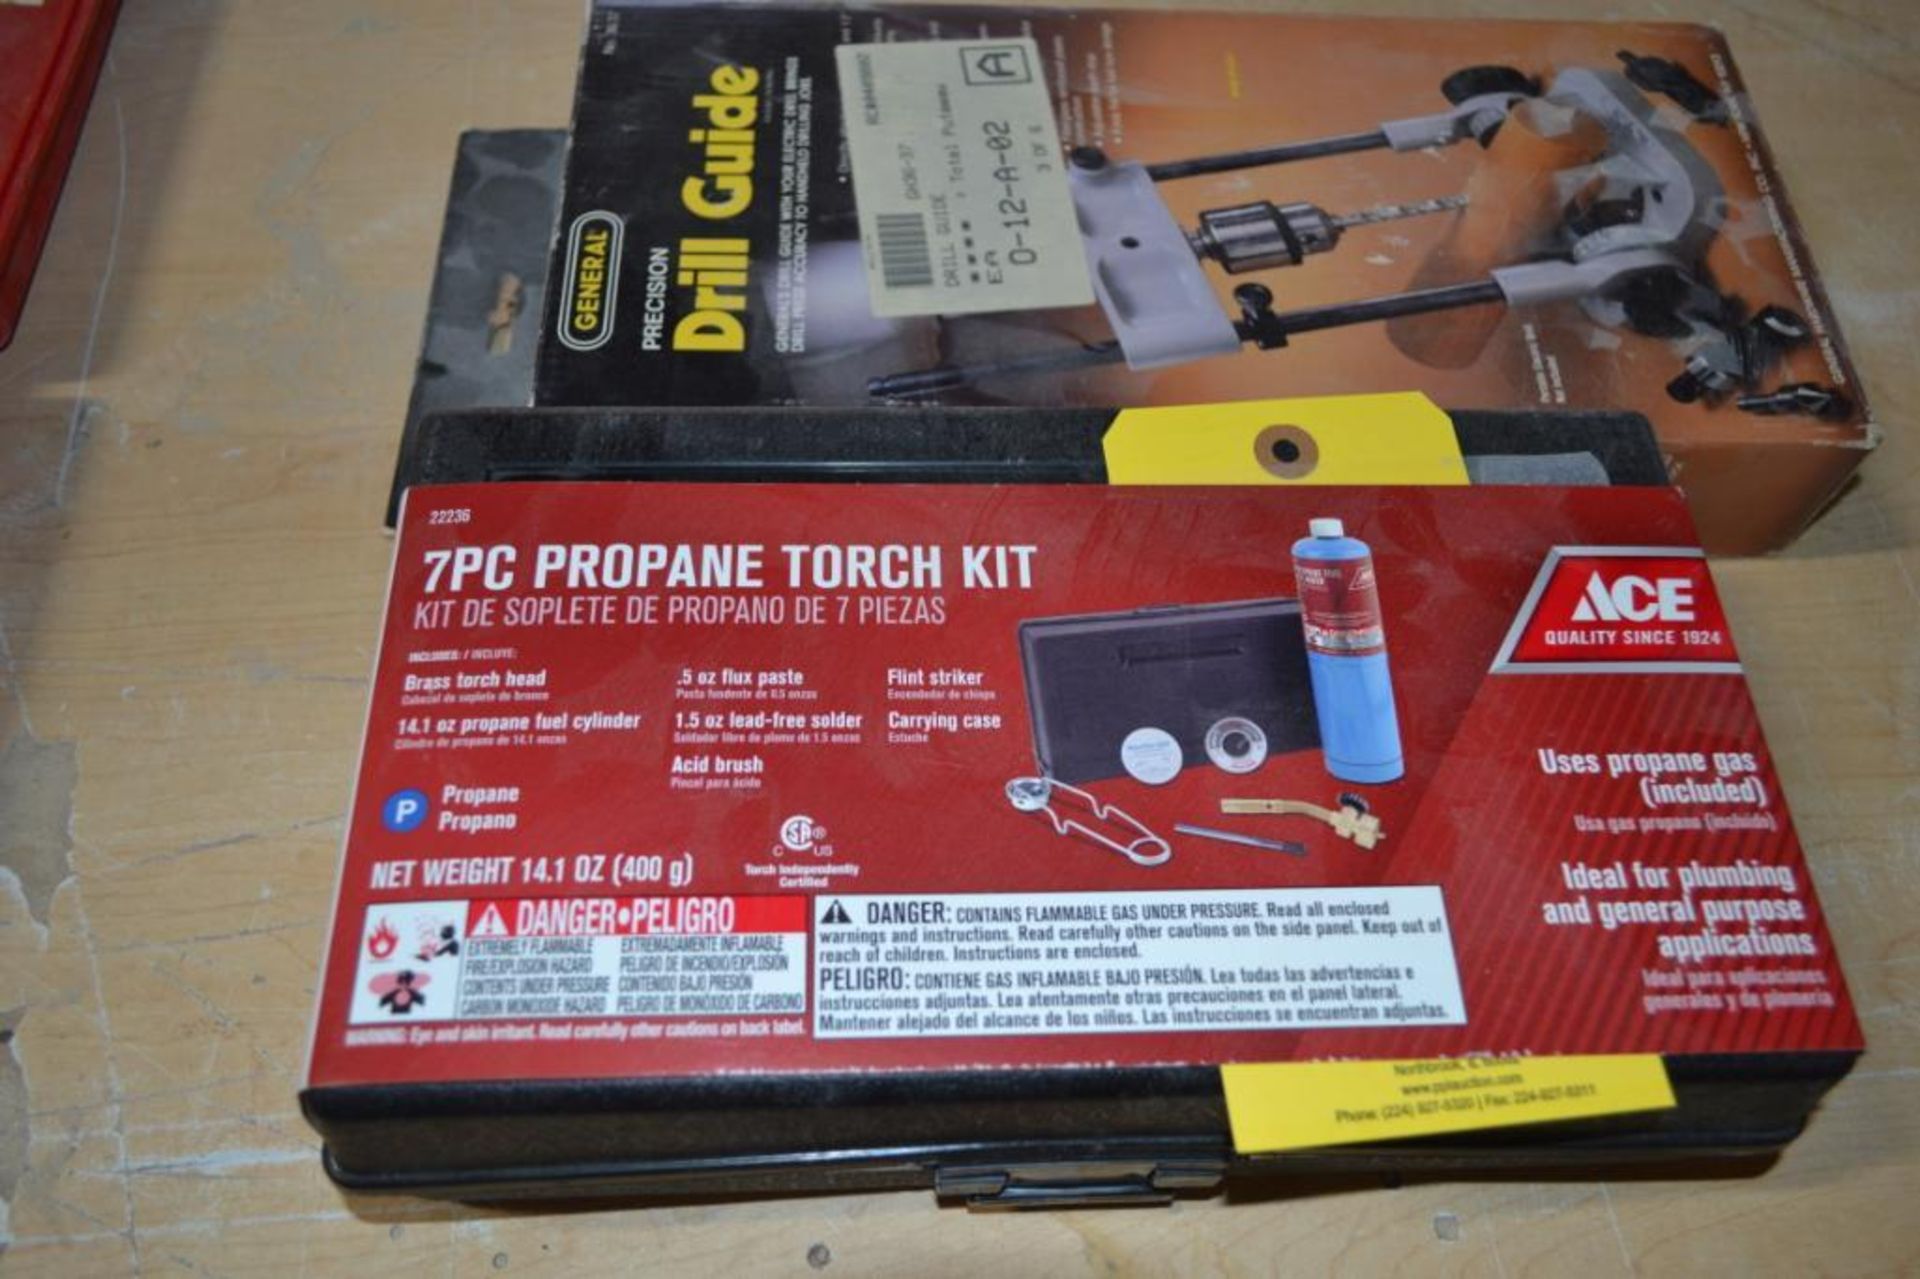 LOT: (1) Portable Torch Kit, (1) Drill Guide